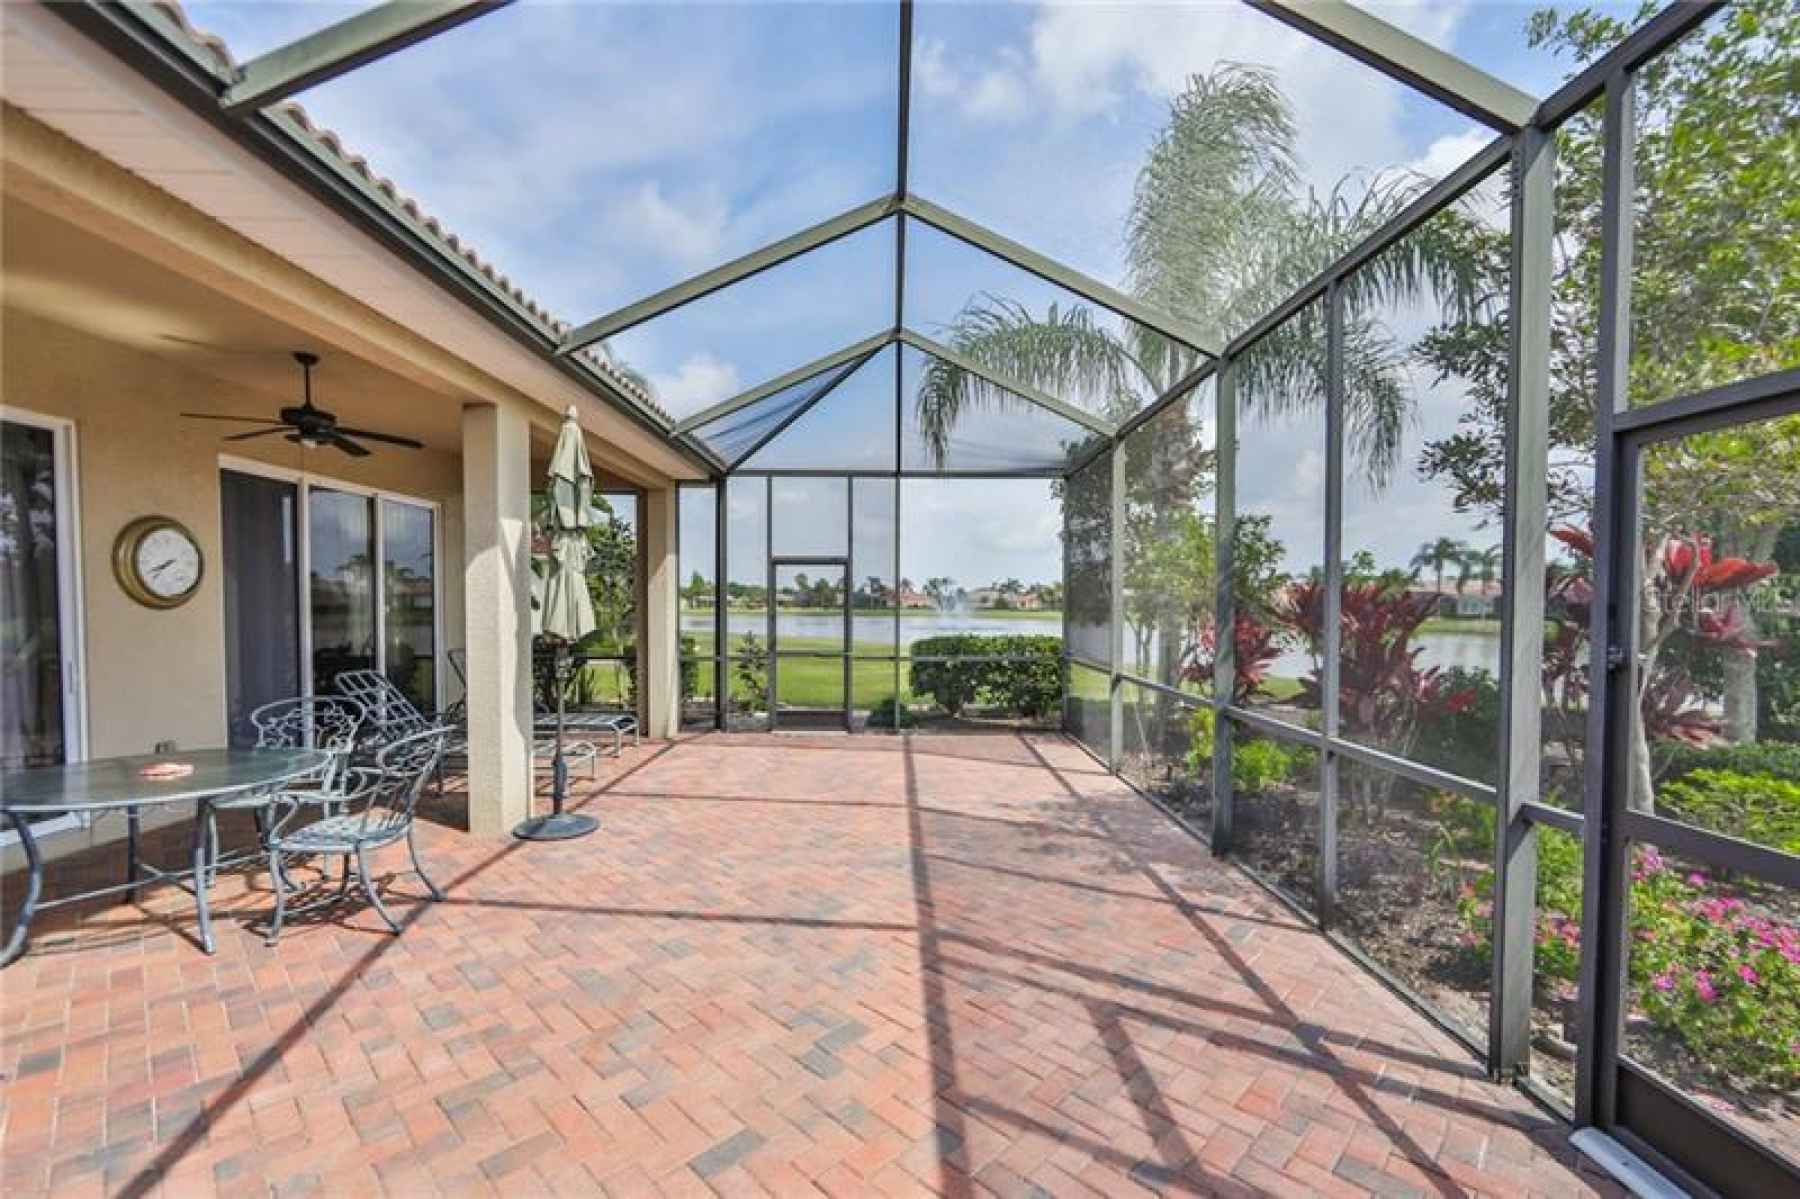 This lanai is huge!  Perfect for entertaining, enjoying the Florida sunshine or maybe a spa or pool?